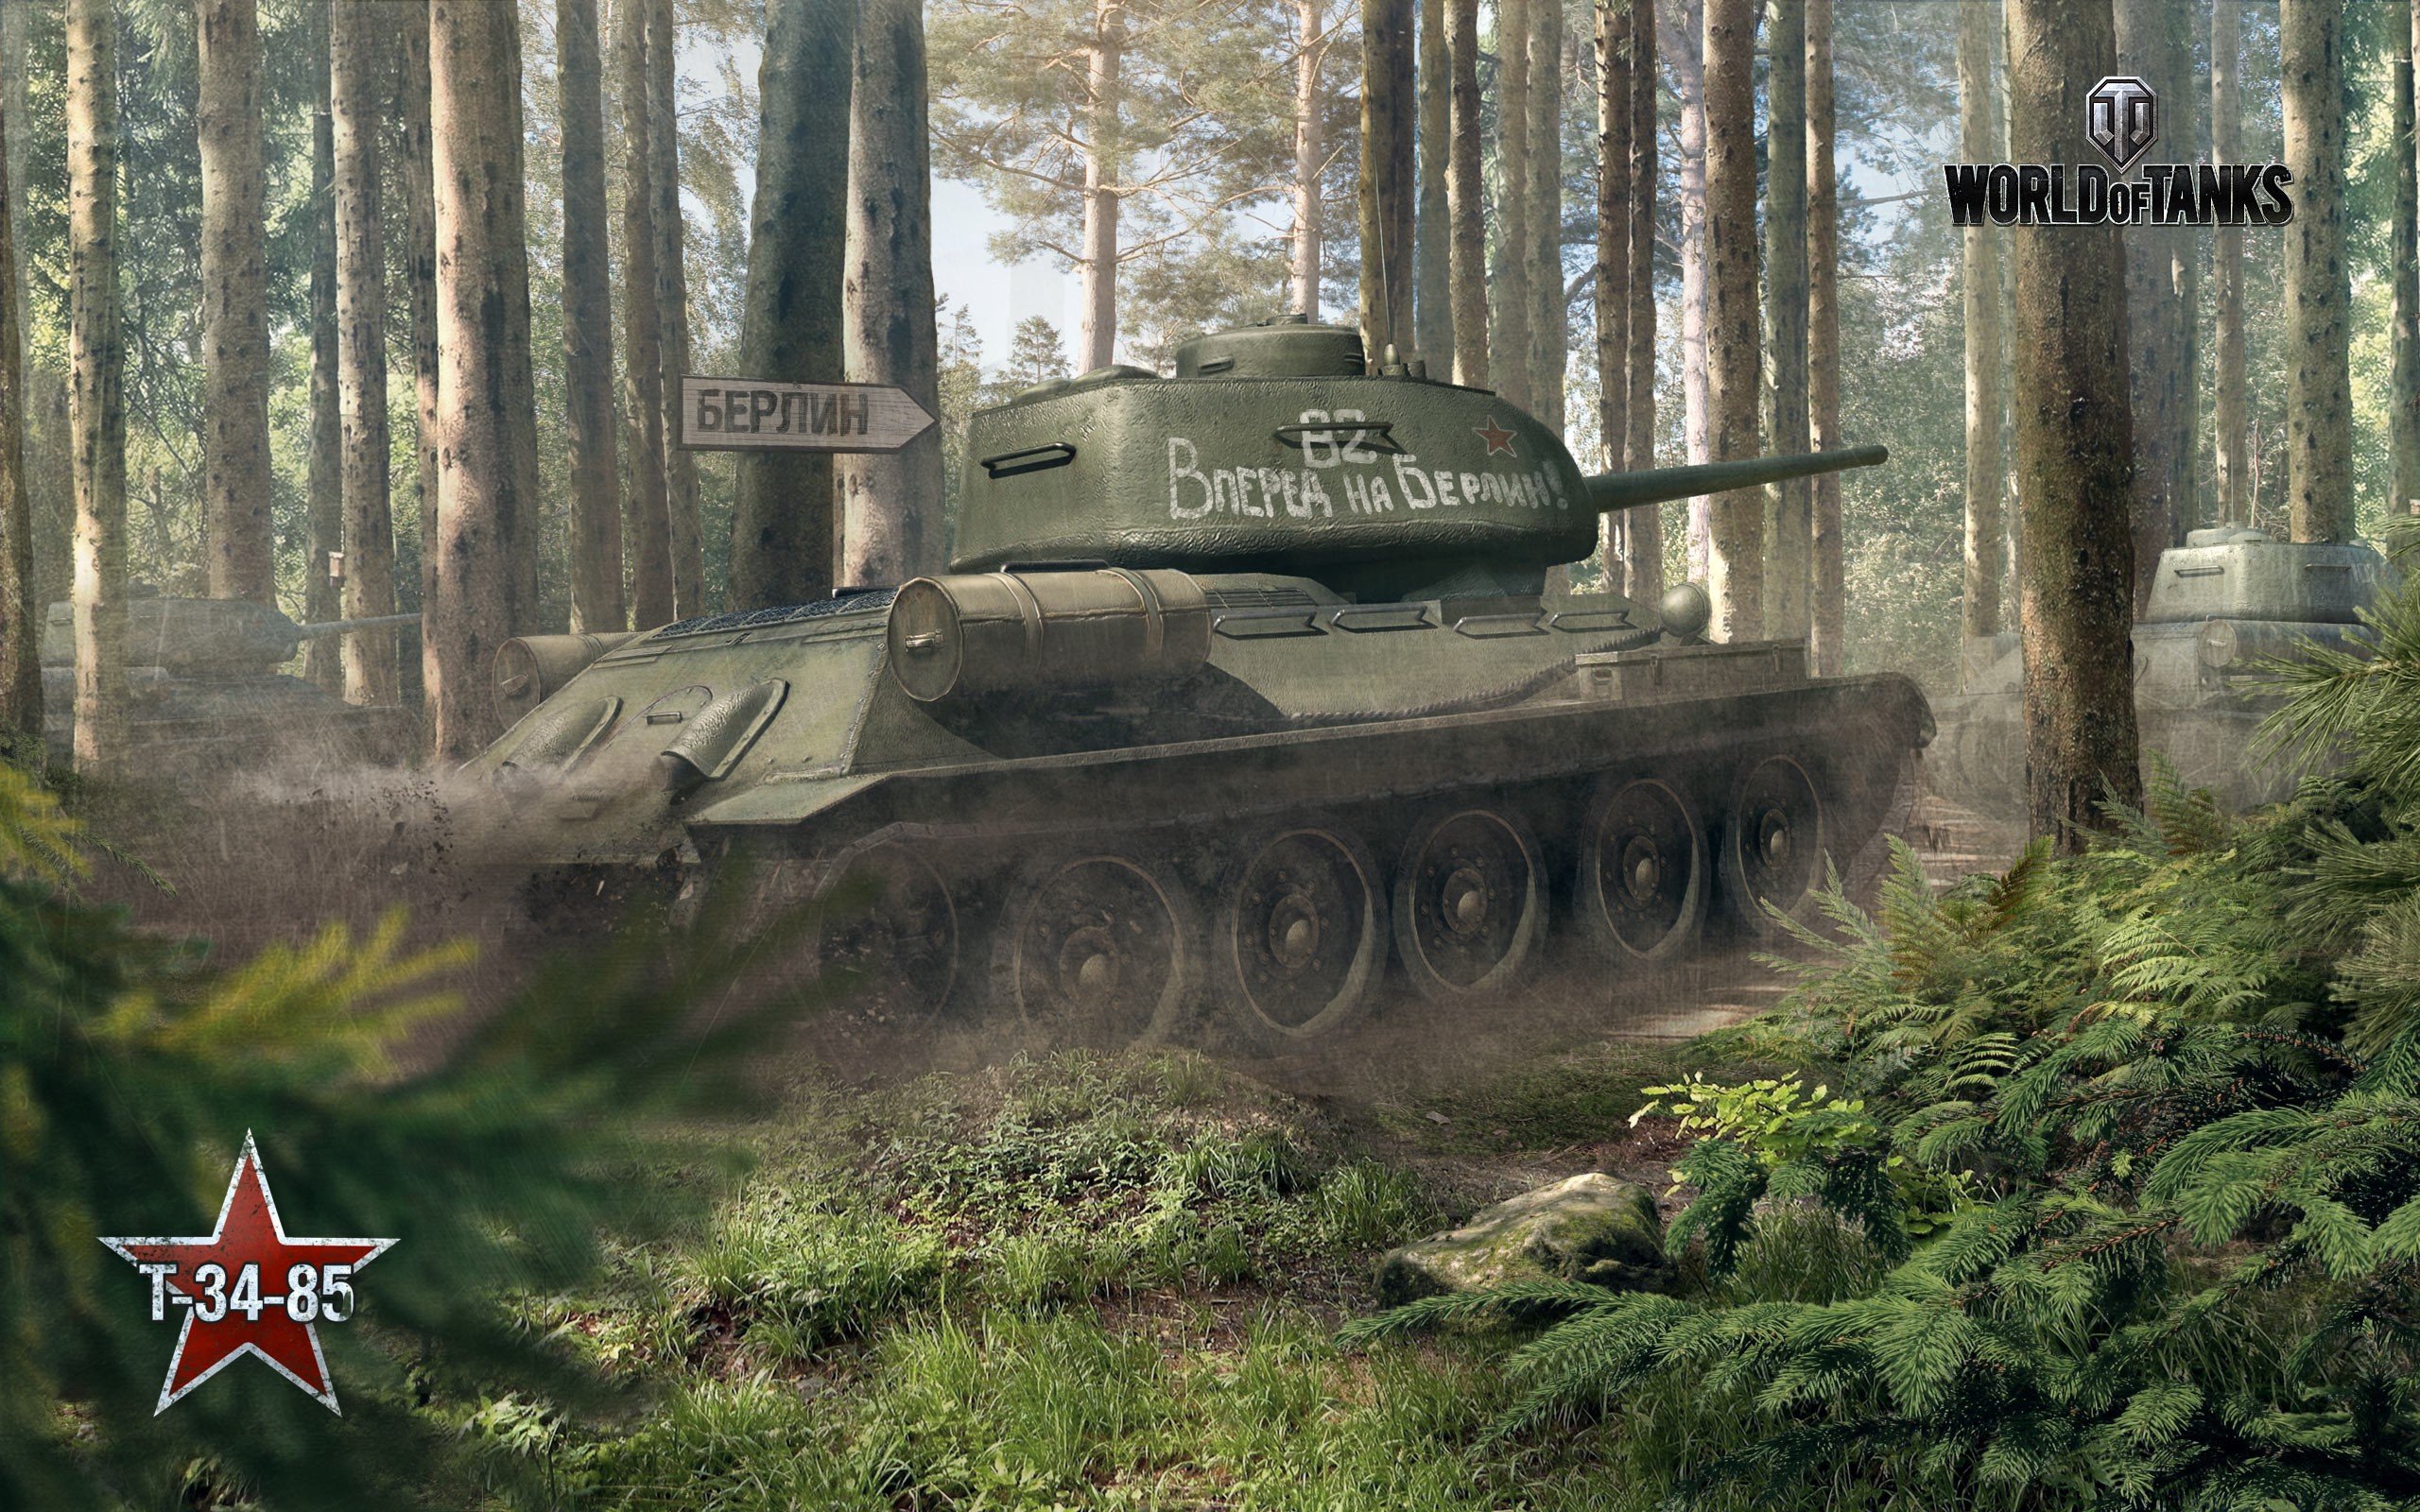 tank, World of Tanks, T 34 85, Wargaming, Forest Wallpaper